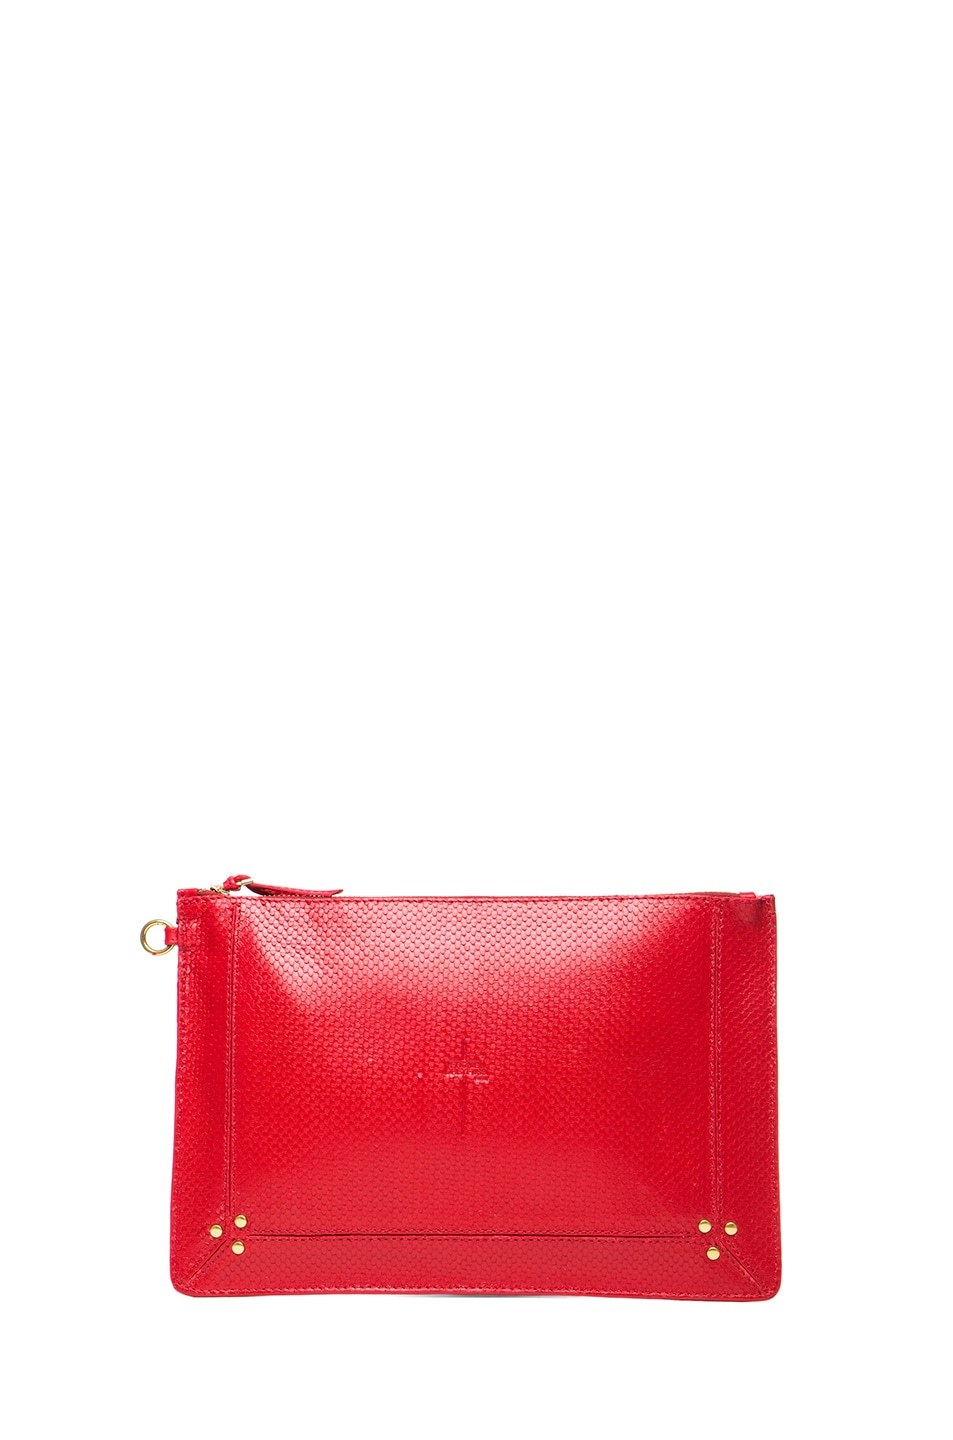 Image 1 of Jerome Dreyfuss Large Popoche Clutch in Red